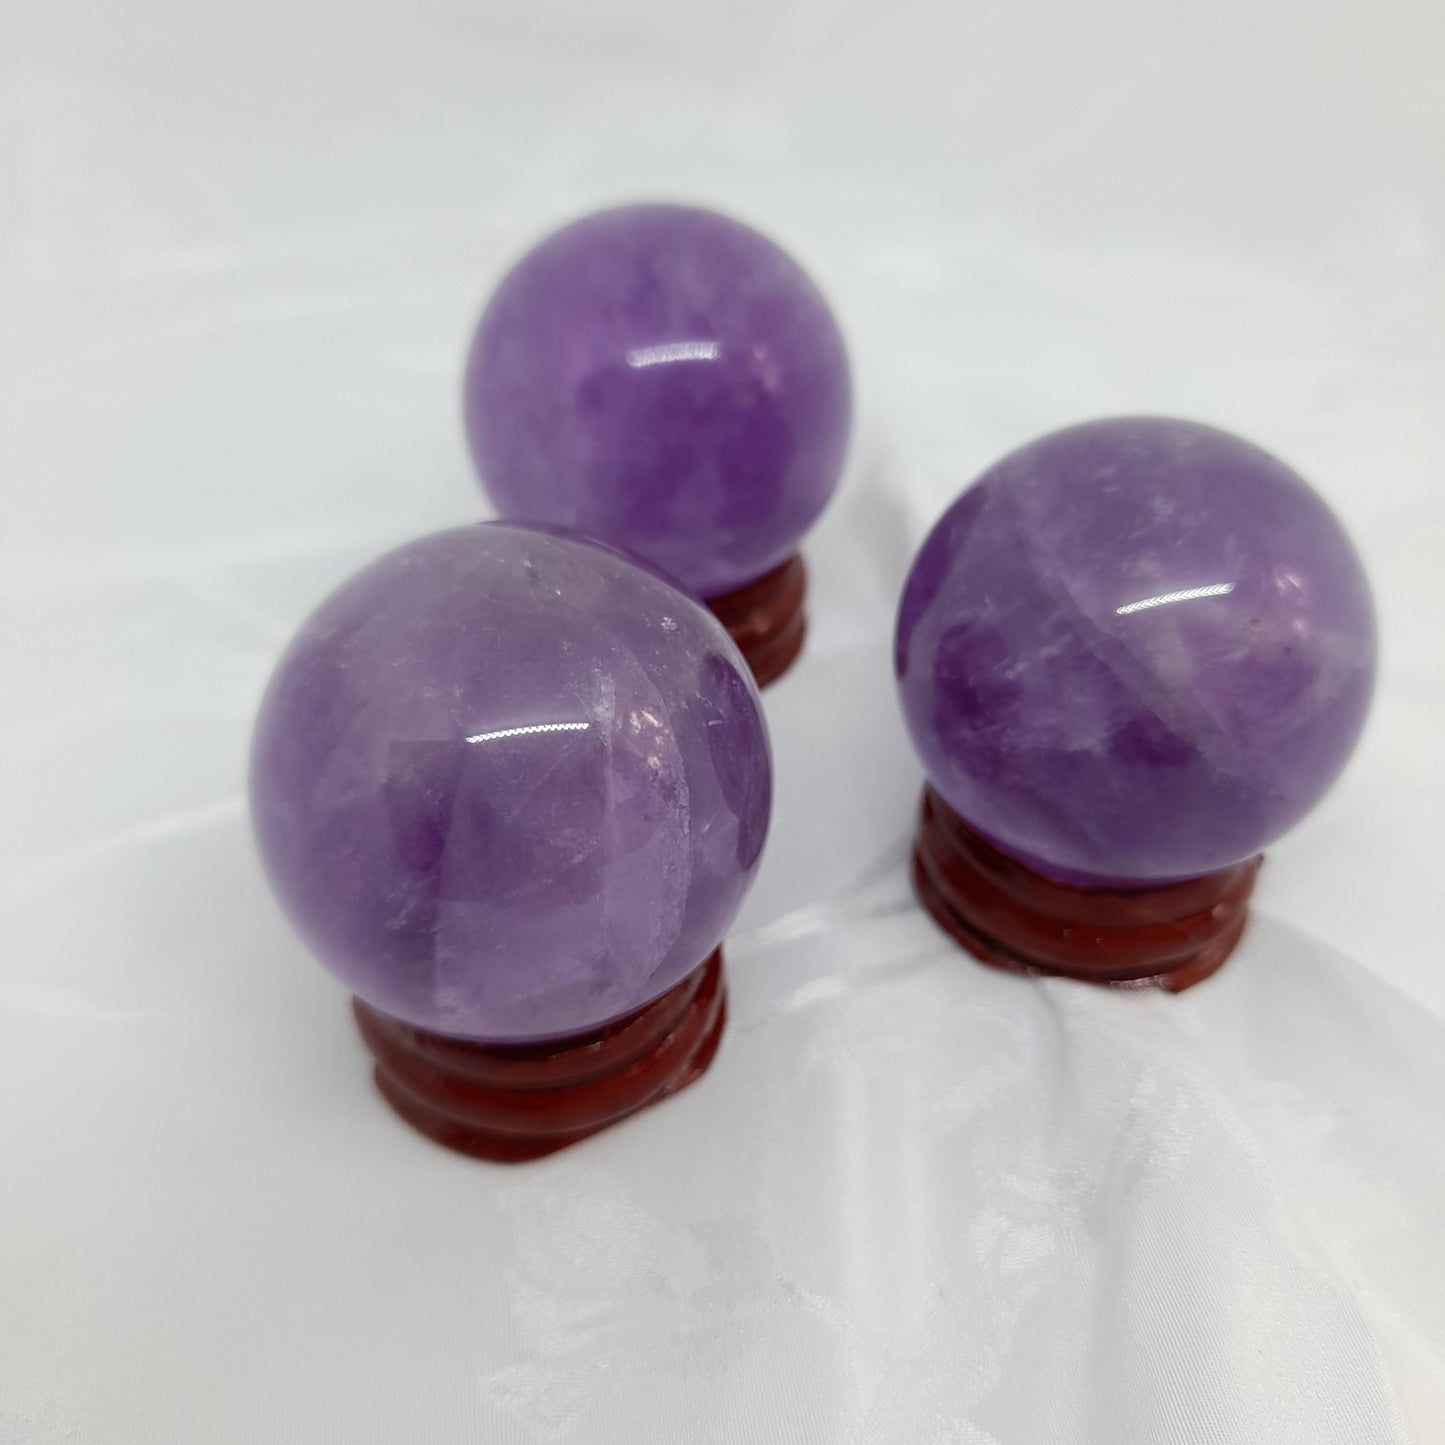 Amethyst Sphere Crystal - Natural Tranquilizer for Peaceful Sleep, Anxiety Relief, and Calming Effects - Approximately 70g, 4cm Diameter 